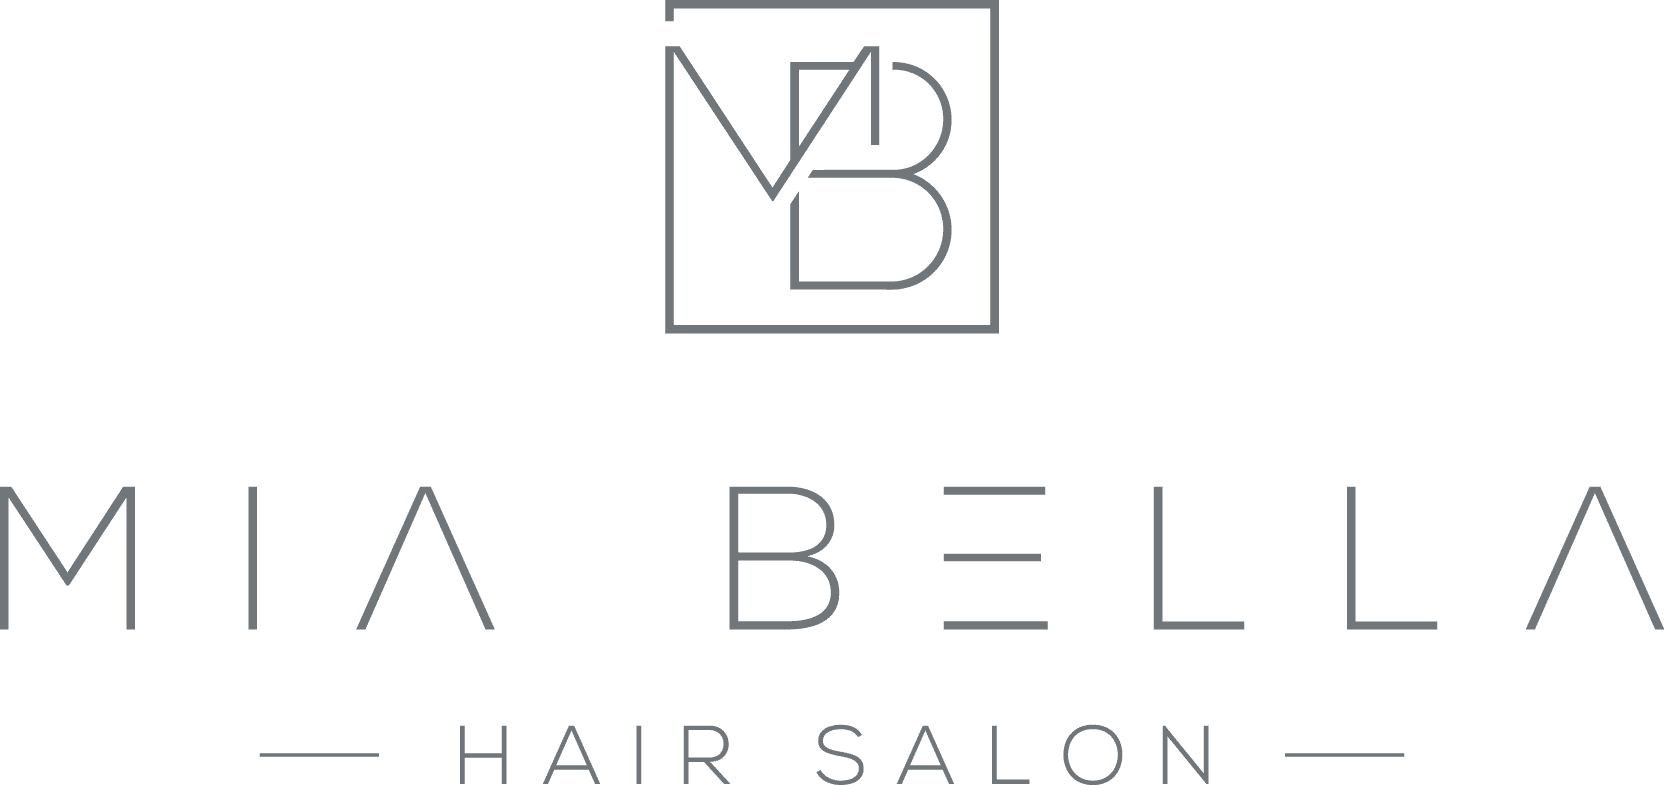 If You Are Looking For A Hair Salon, You've Come To The Right Place